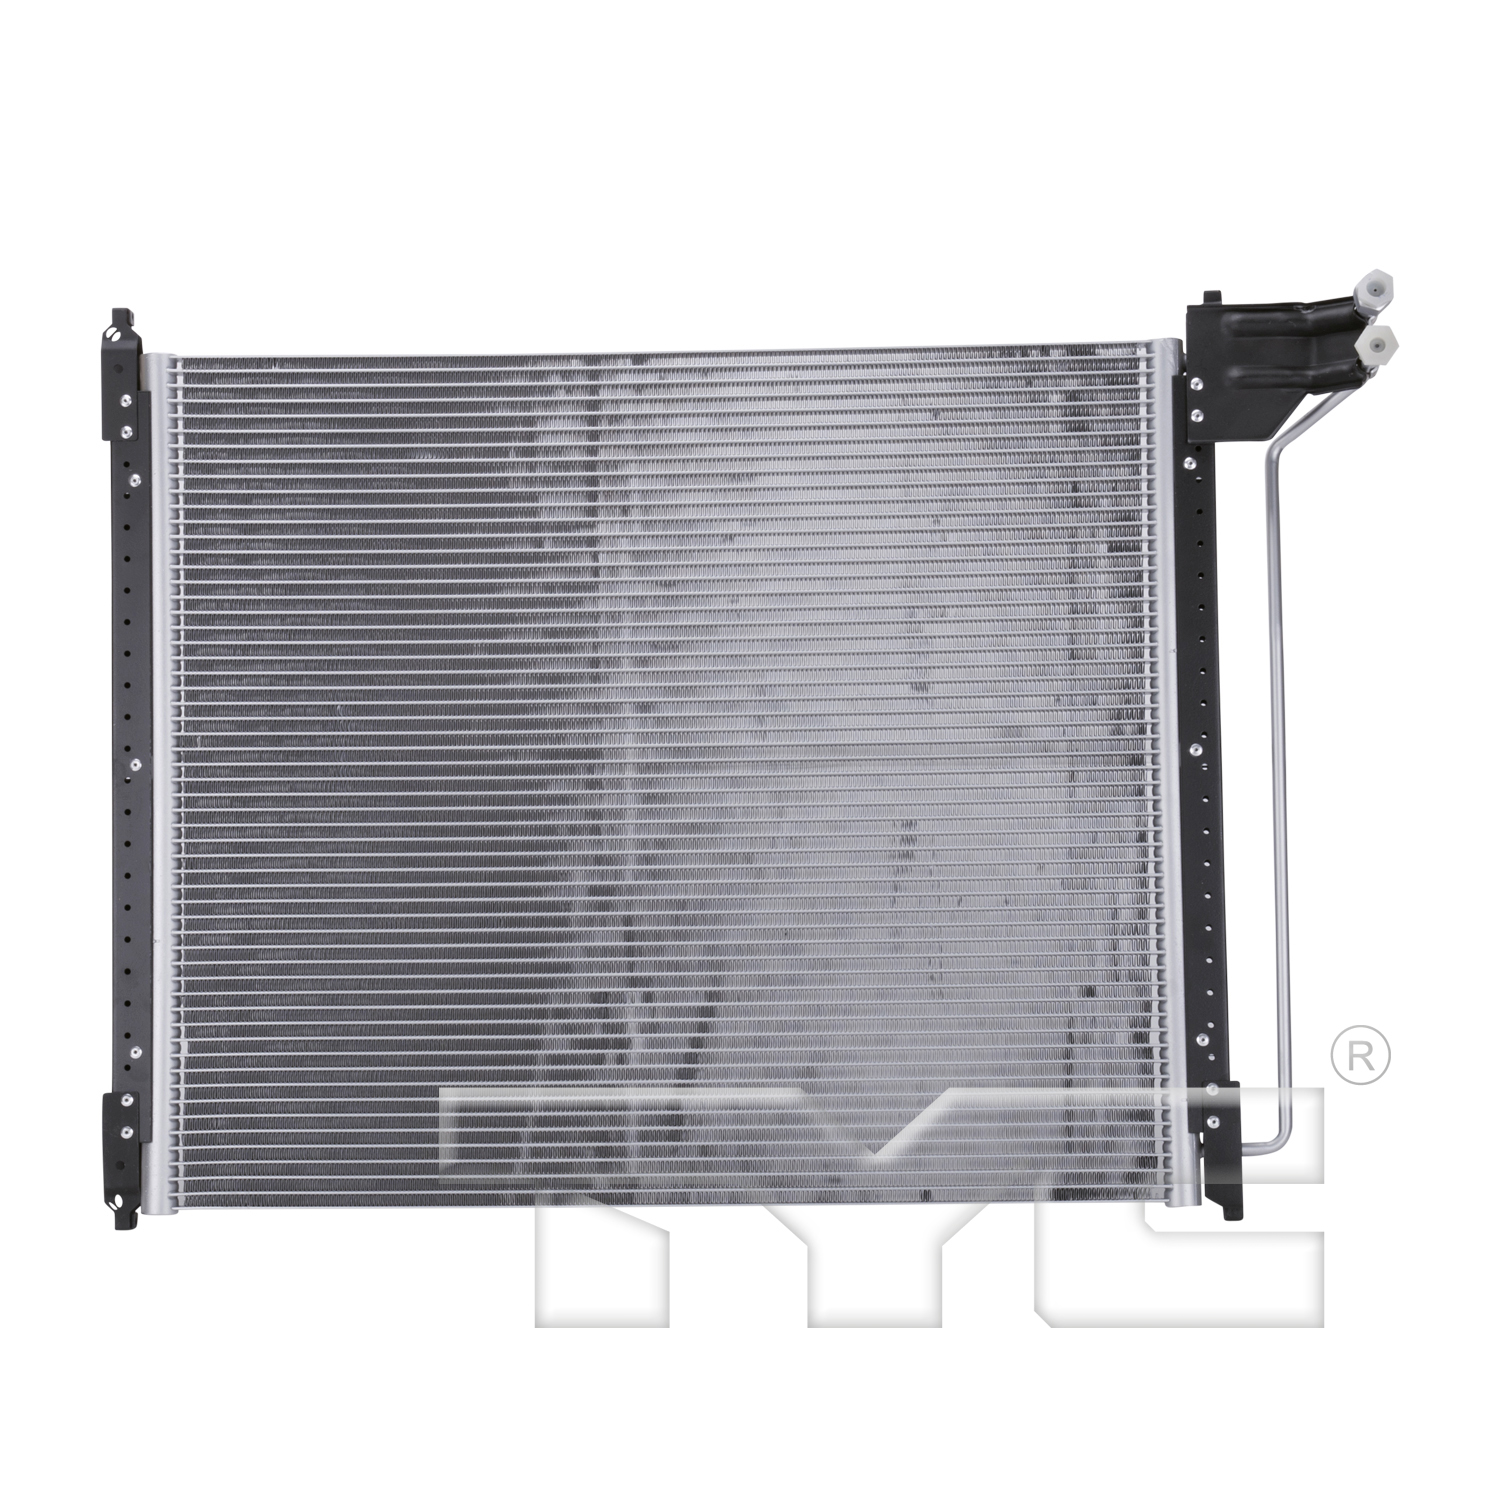 Aftermarket AC CONDENSERS for FORD - E-350 CLUB WAGON, E-350 CLUB WAGON,03-03,Air conditioning condenser